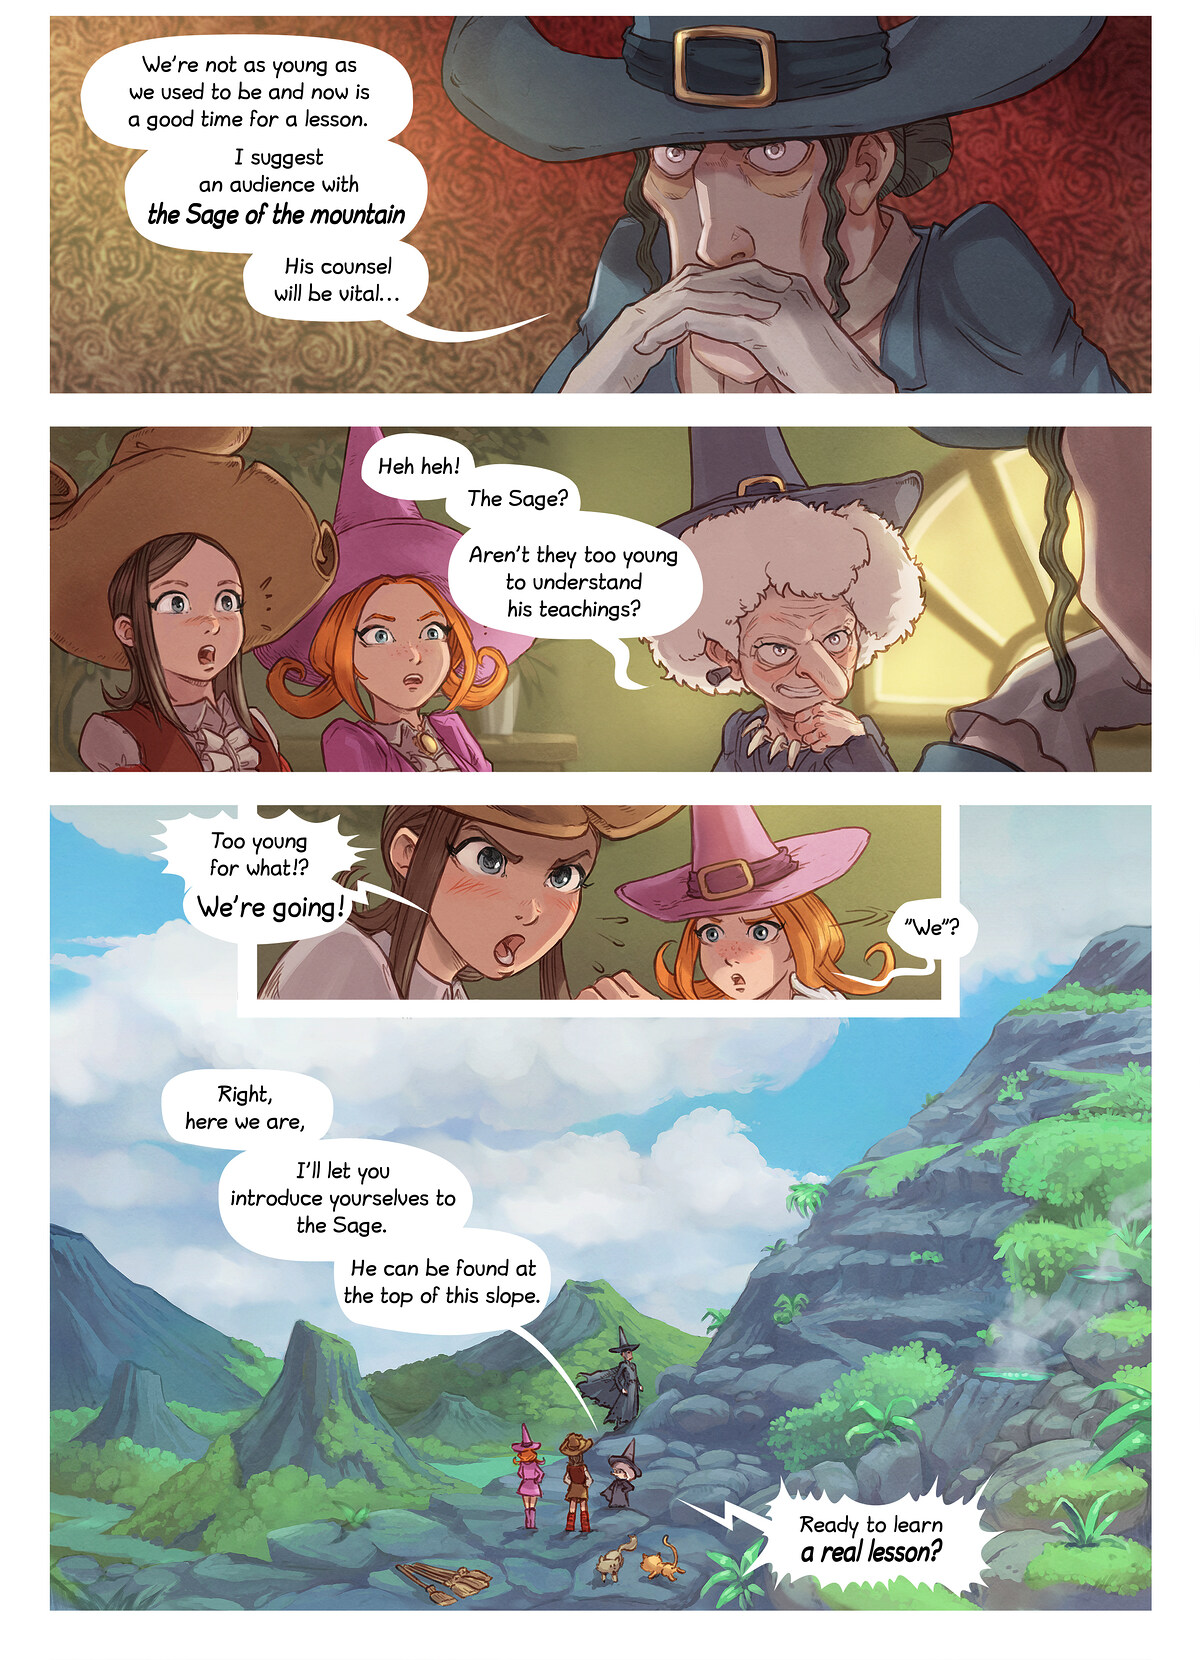 Episode 16: The Sage of the Mountain, Page 4